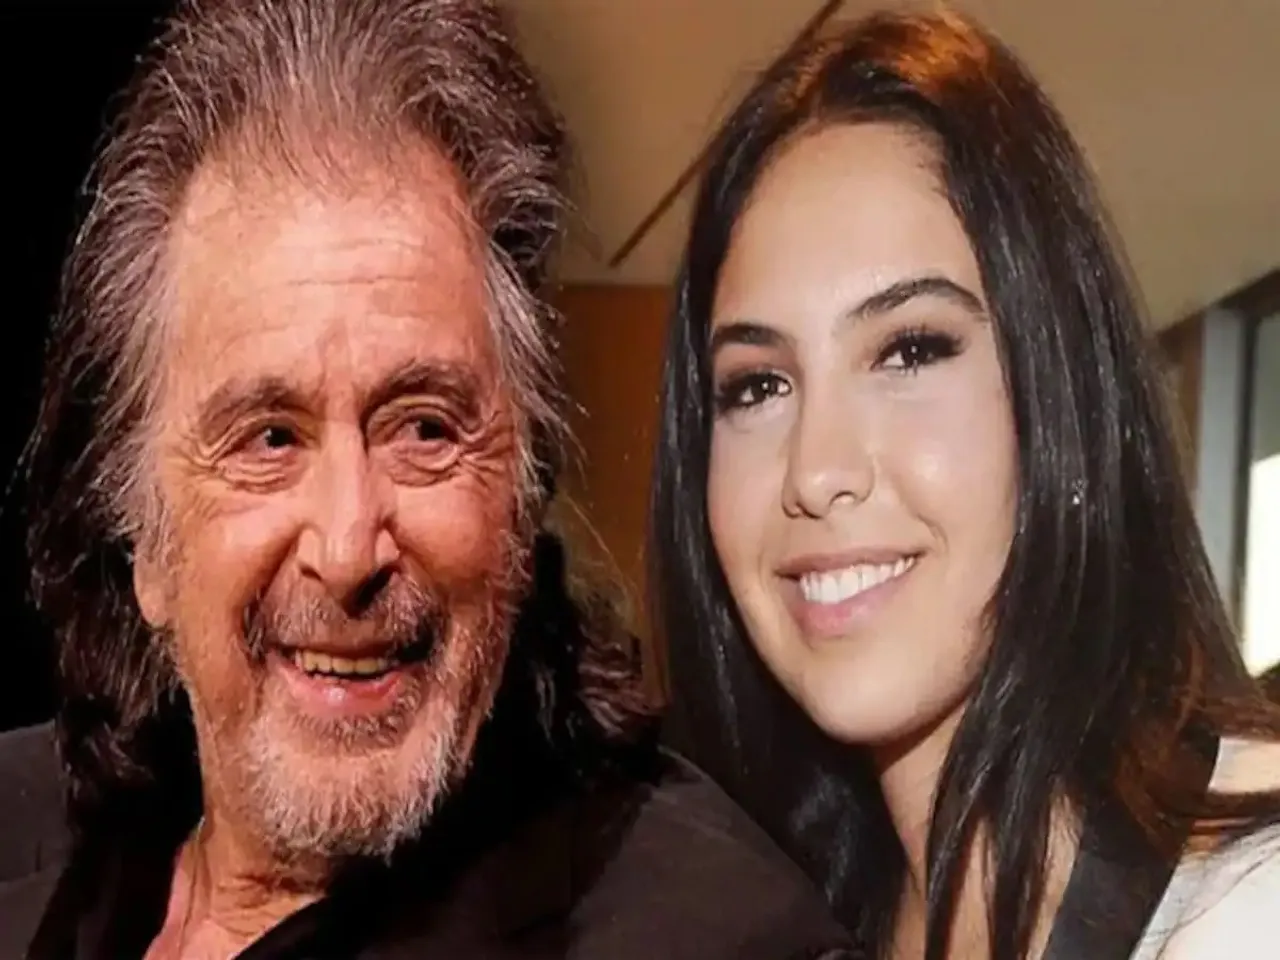 83-year-old Al Pacino welcomes baby boy with 29-year-old girlfriend